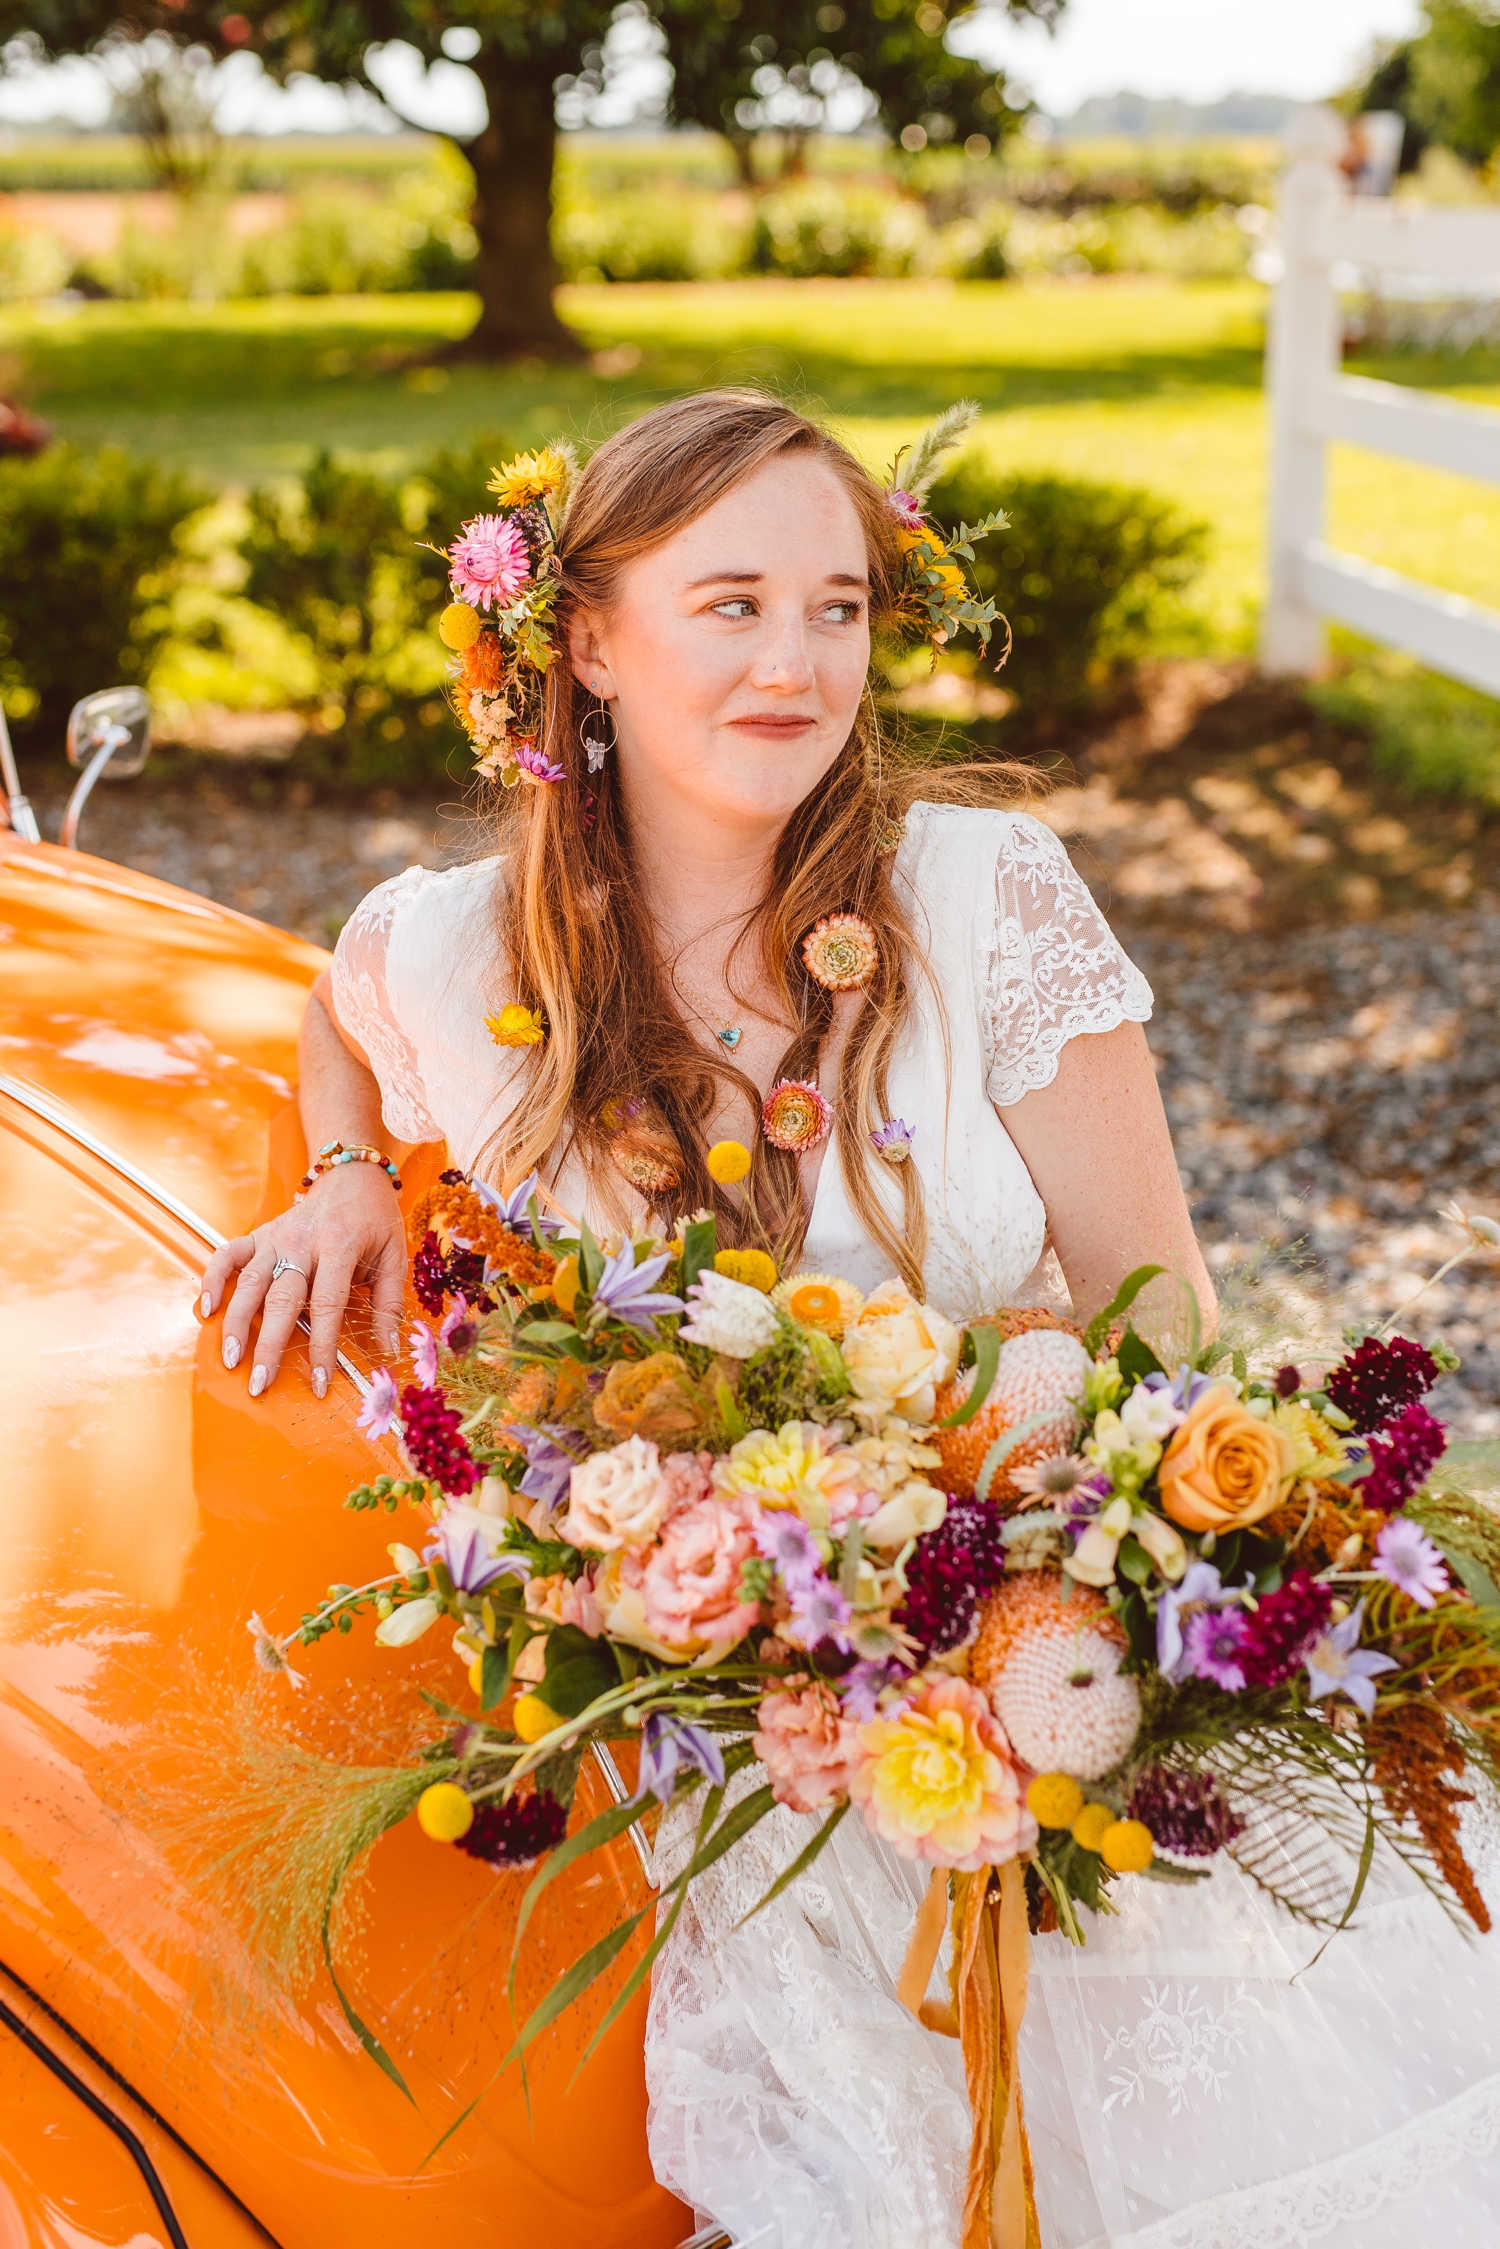 Boho bride with half floral wreath in hair holding colorful hand-tied bouquet | Brooke Michelle Photography